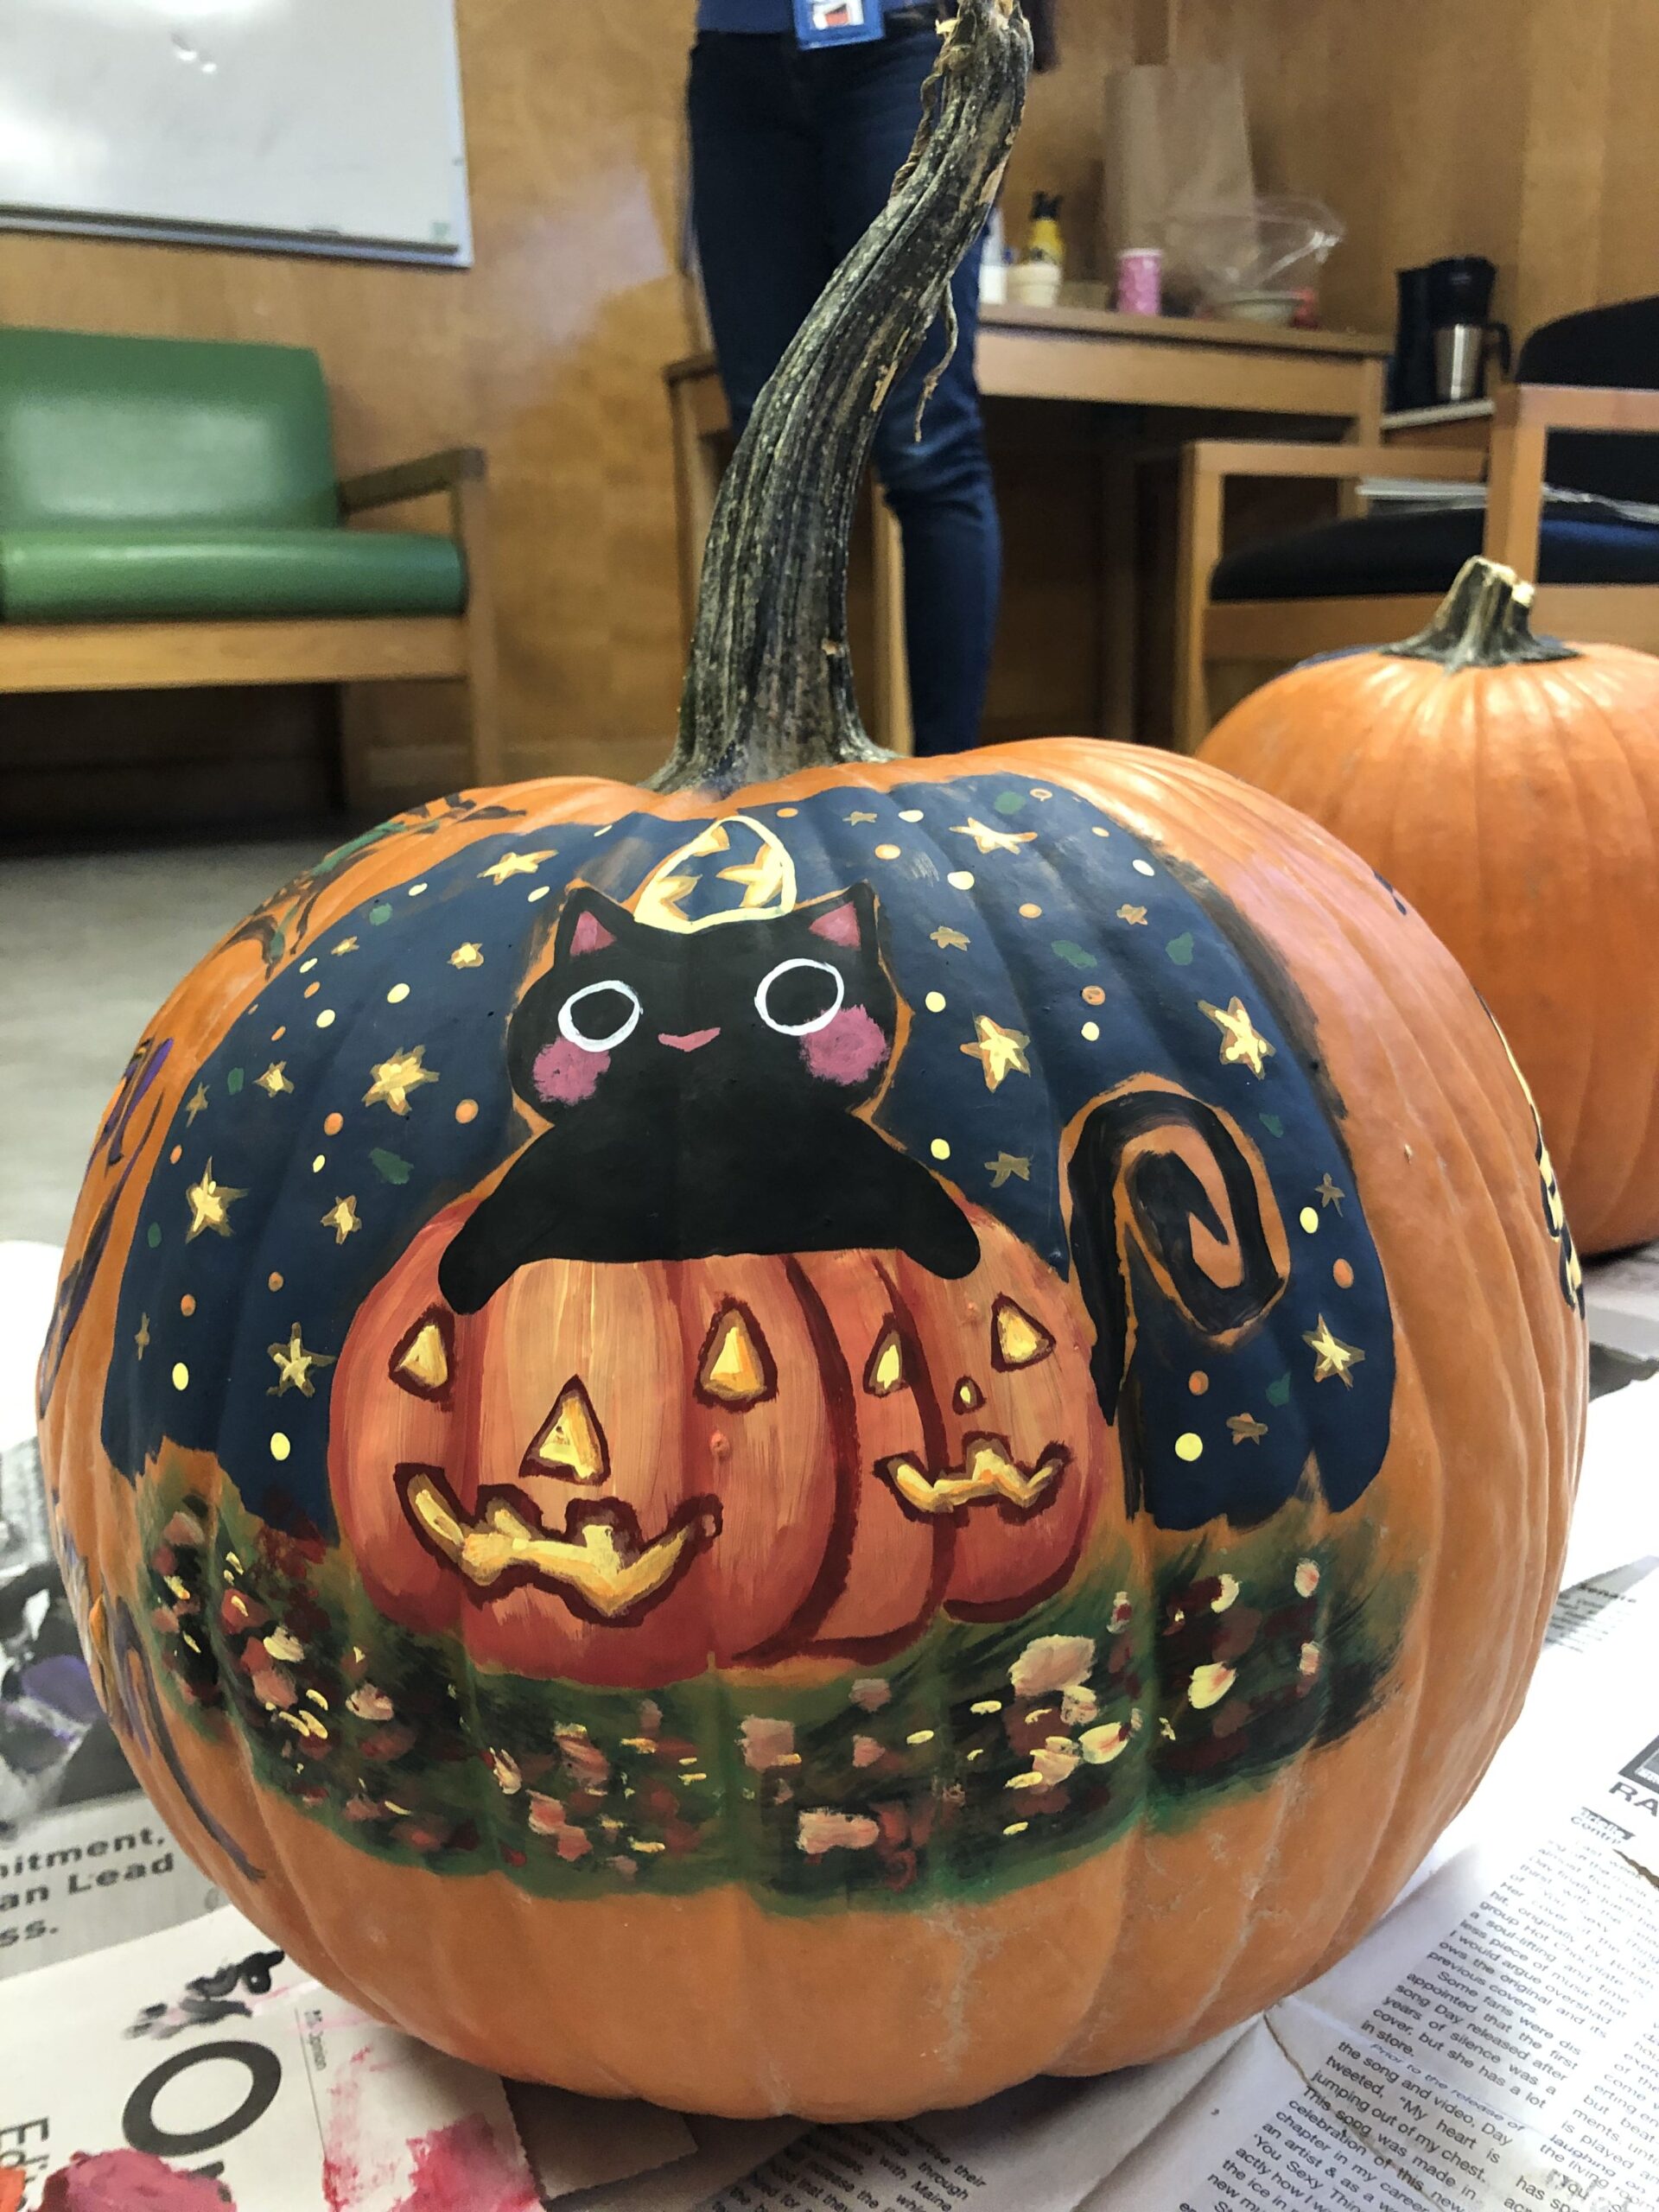 Pumpkin Painted with two pumpkins and a cat